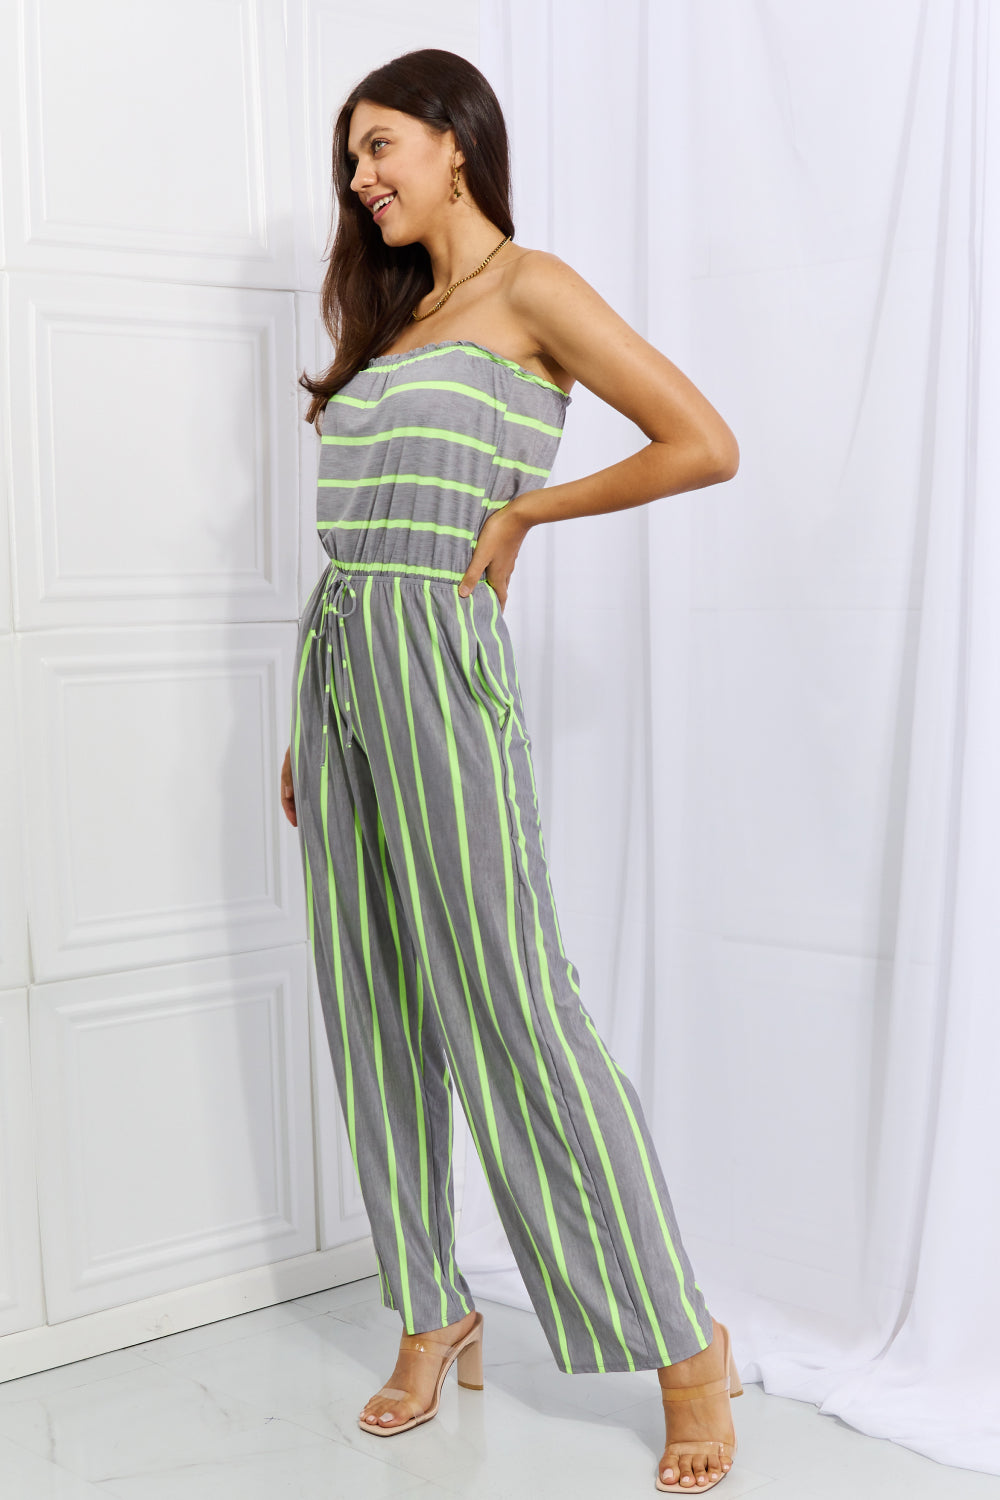 Sew In Love Pop Of Color Full Size Sleeveless Striped Jumpsuit  Sunset and Swim   